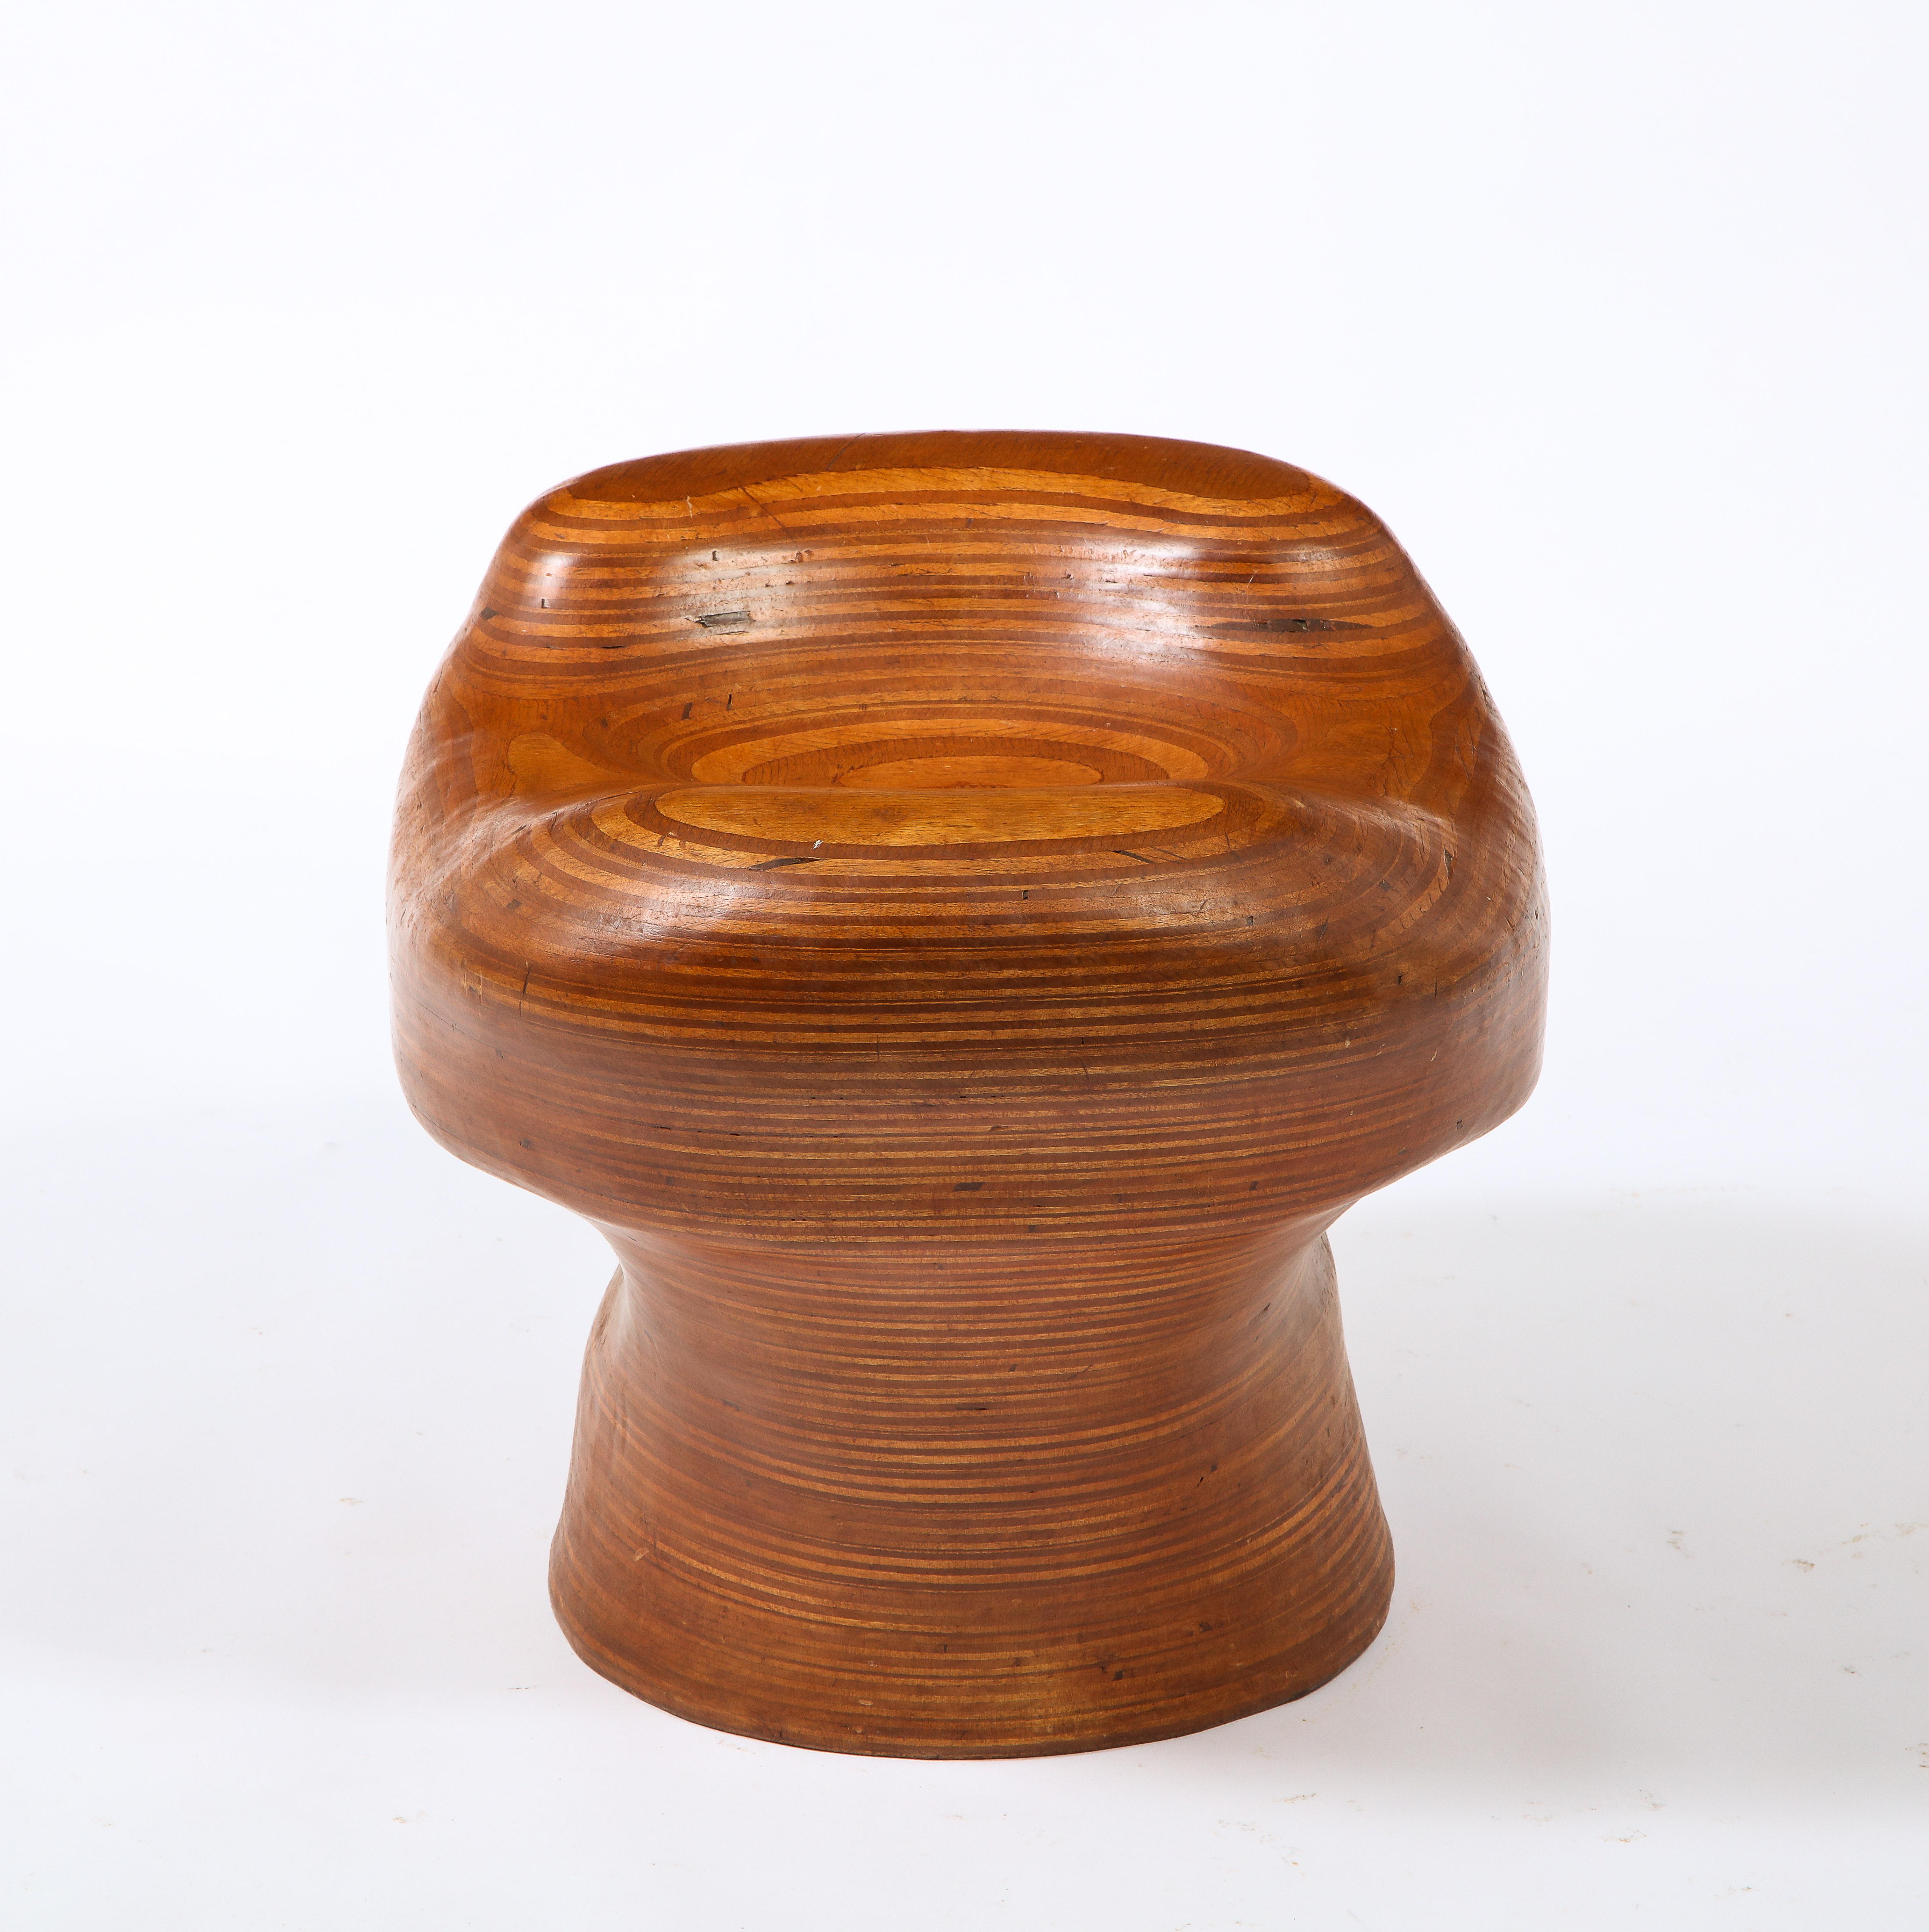 Denis Cospen Biomorphic Stool in Laminated Wood, France 1960's For Sale 1